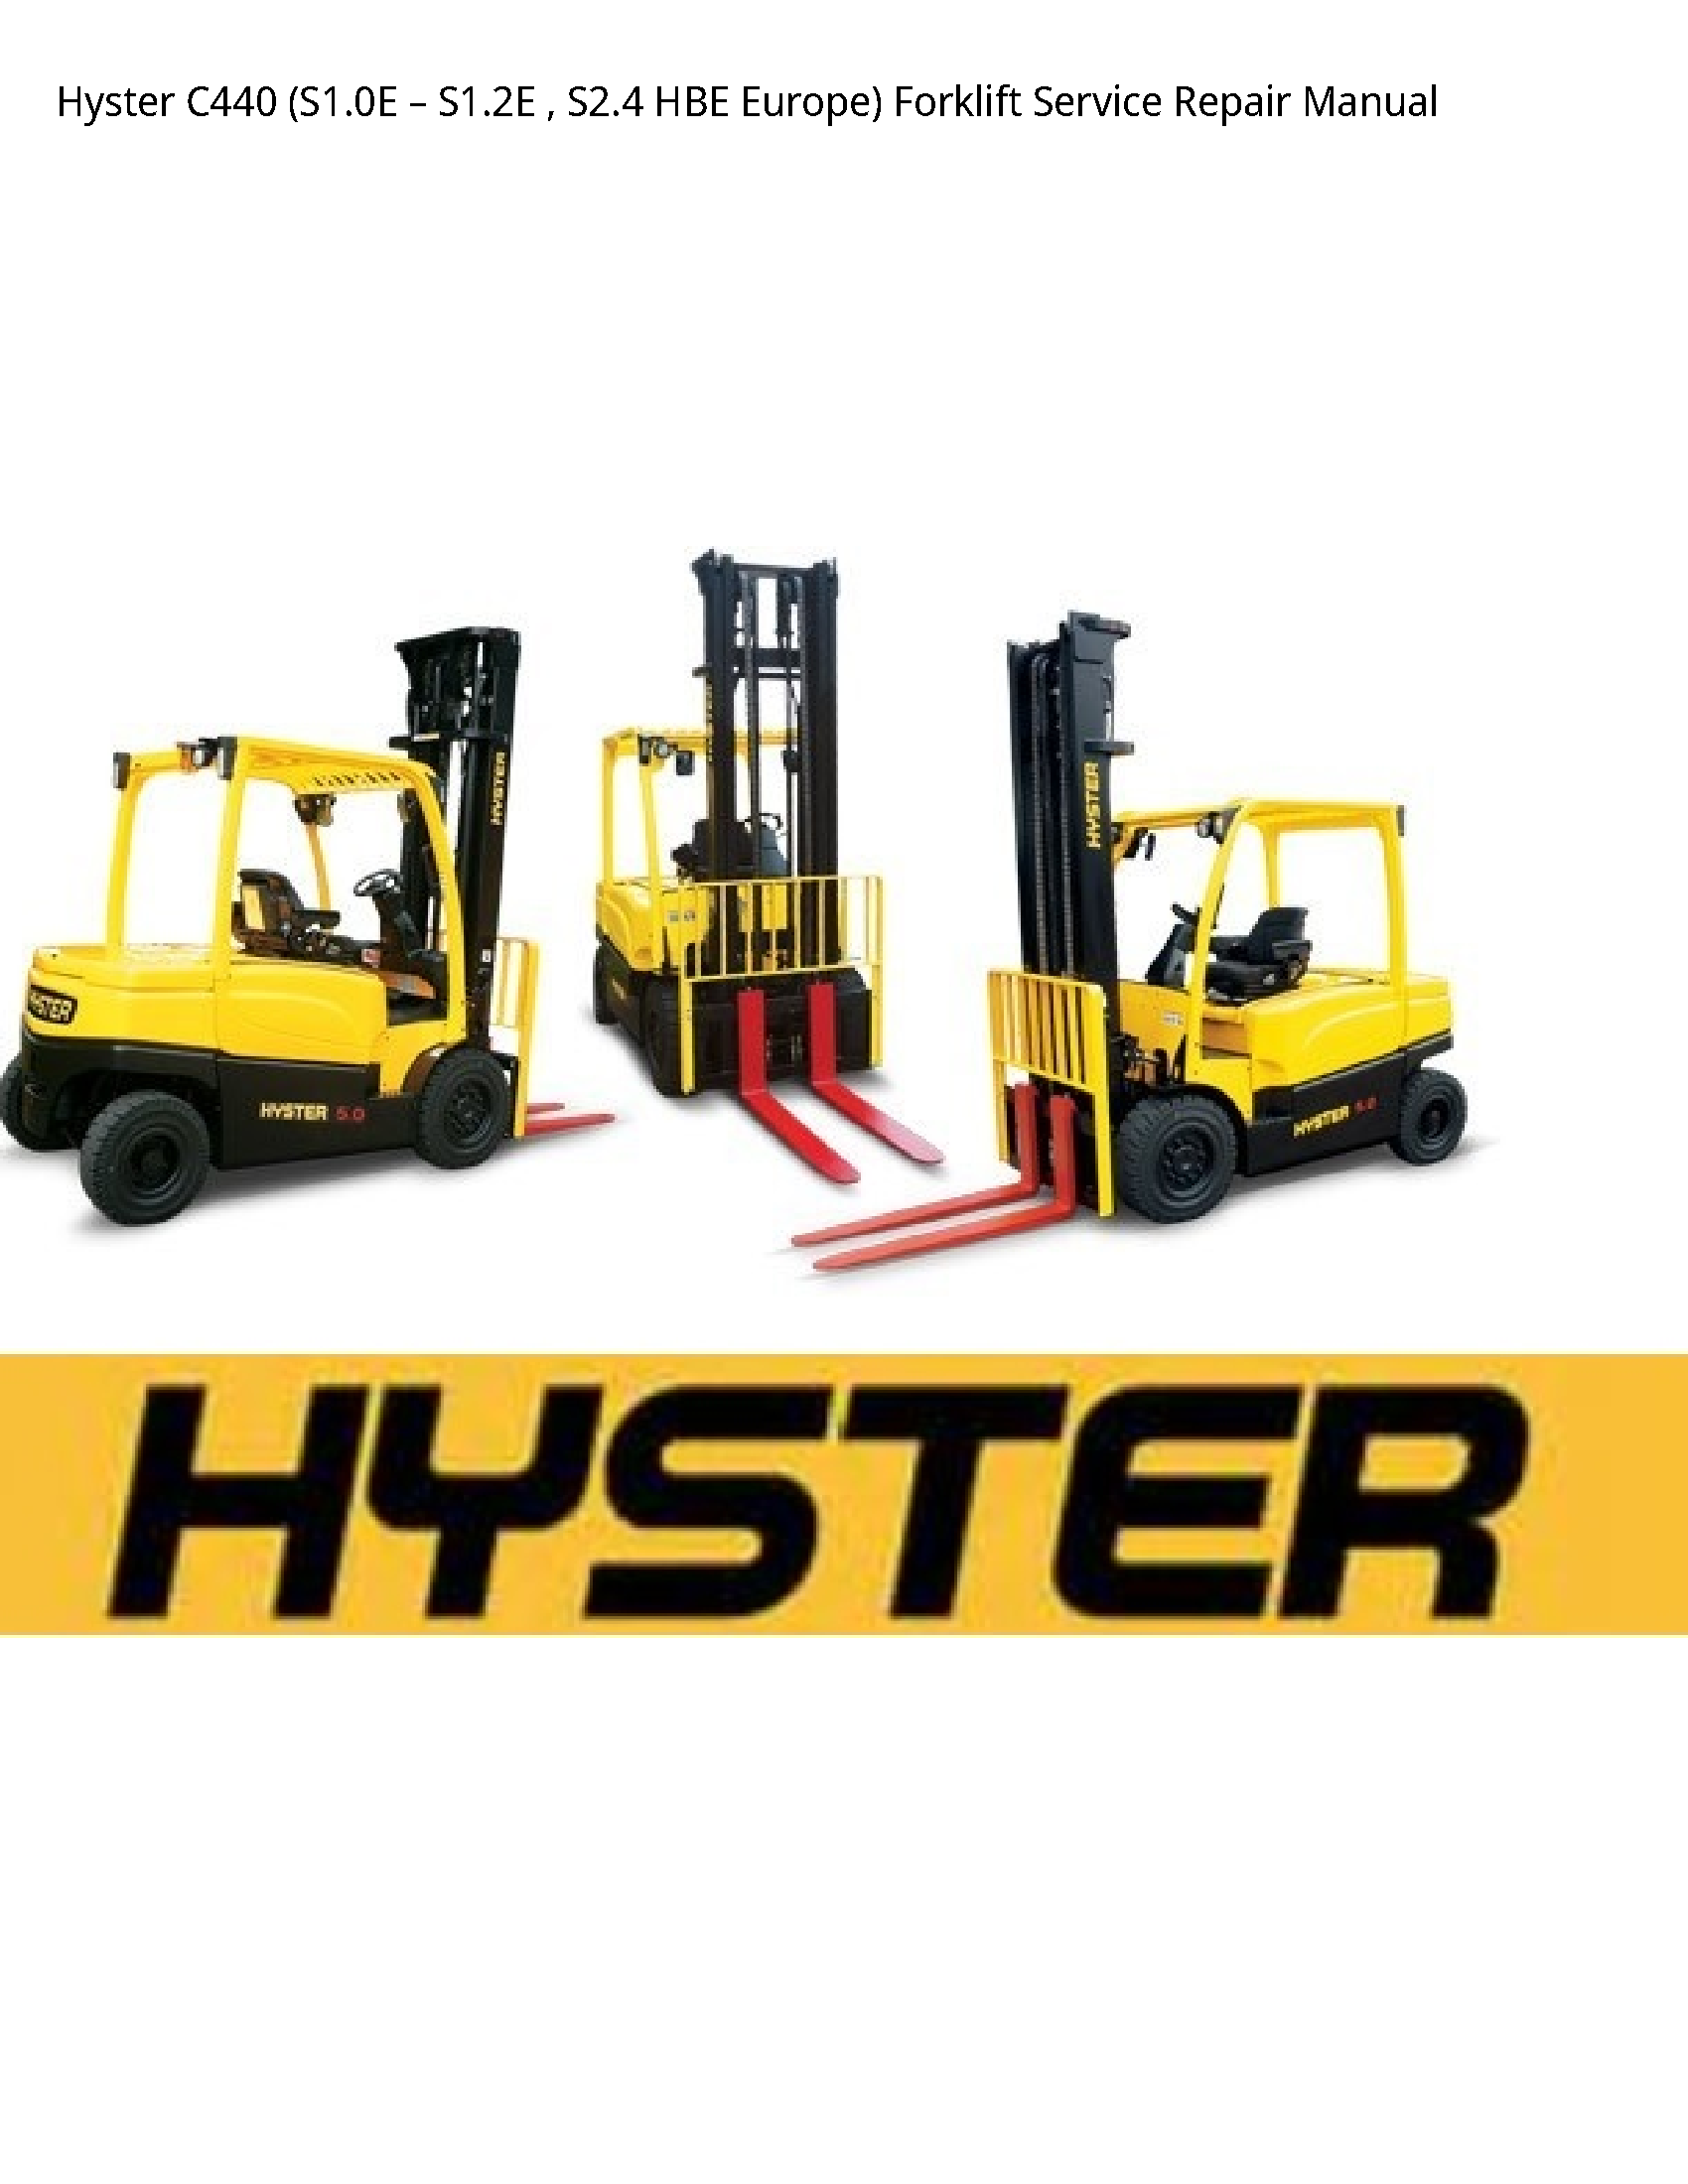 Hyster C440 HBE Europe) Forklift manual